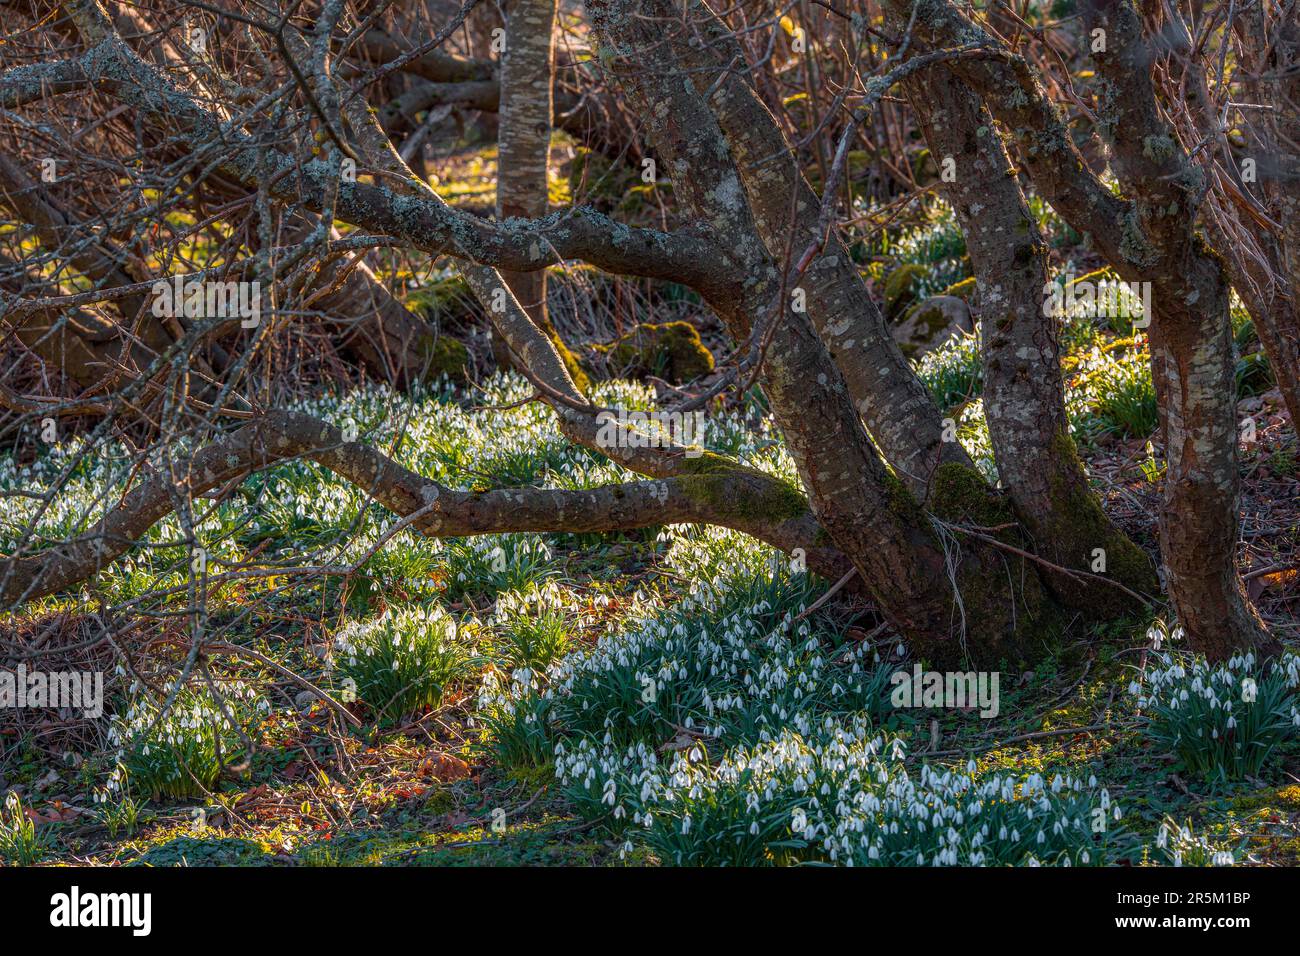 A carpet of snowdrops in full bloom at the edge of a wood Stock Photo